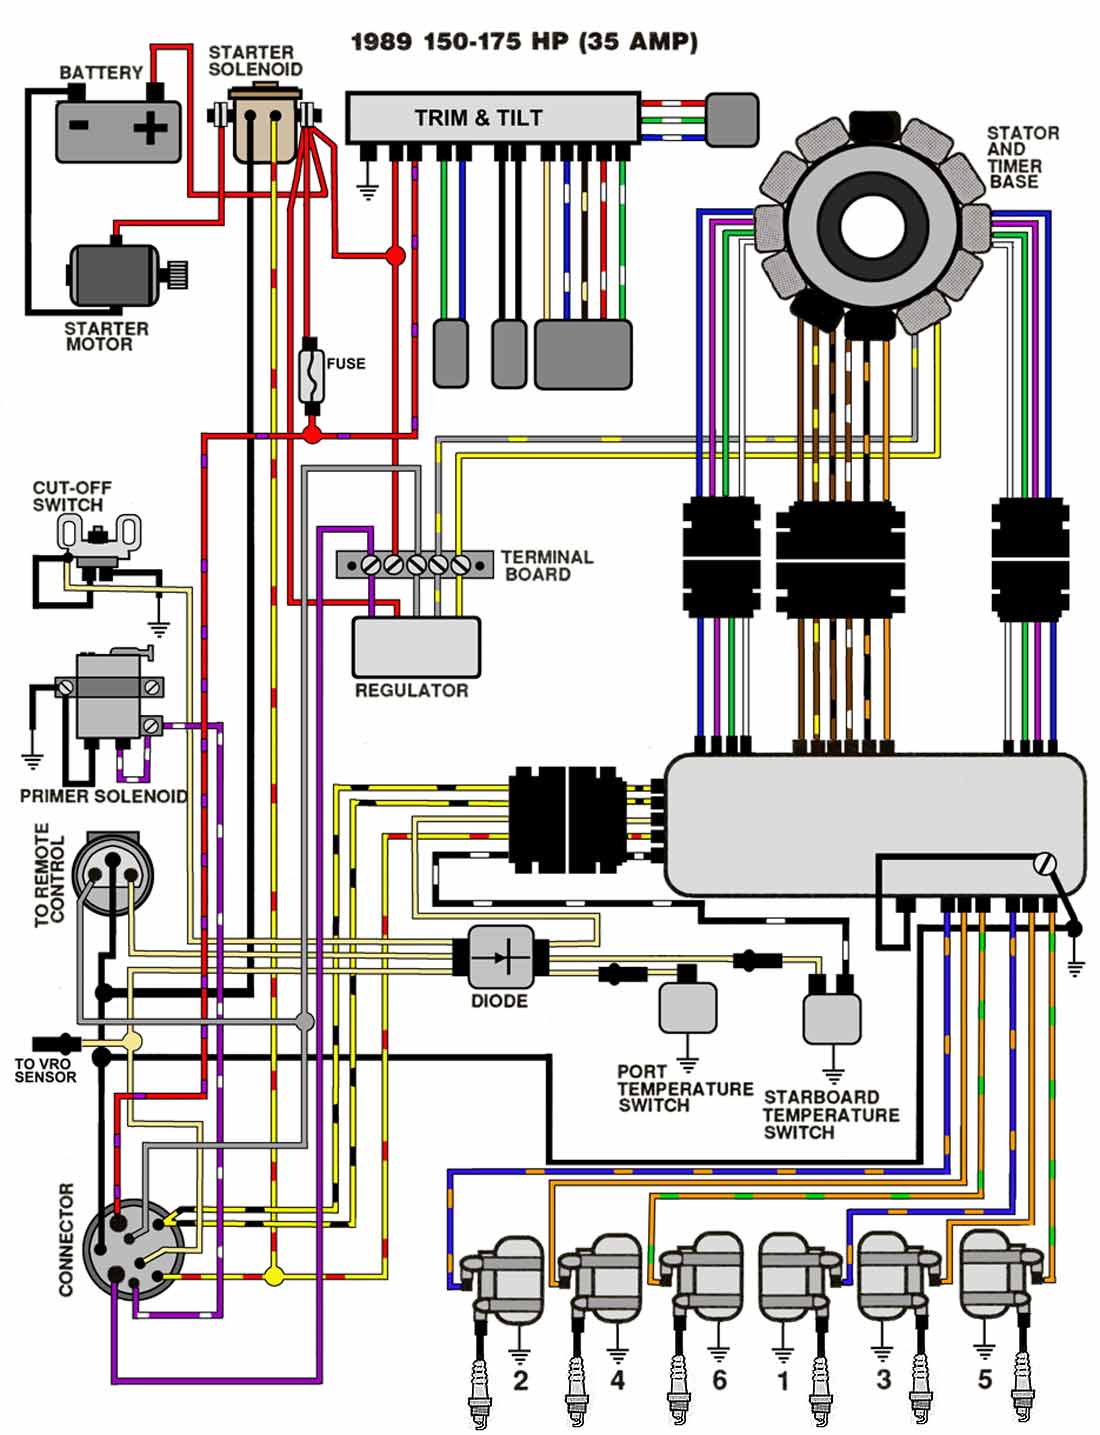 The Closest Schematic I Could Find The Ignition Is